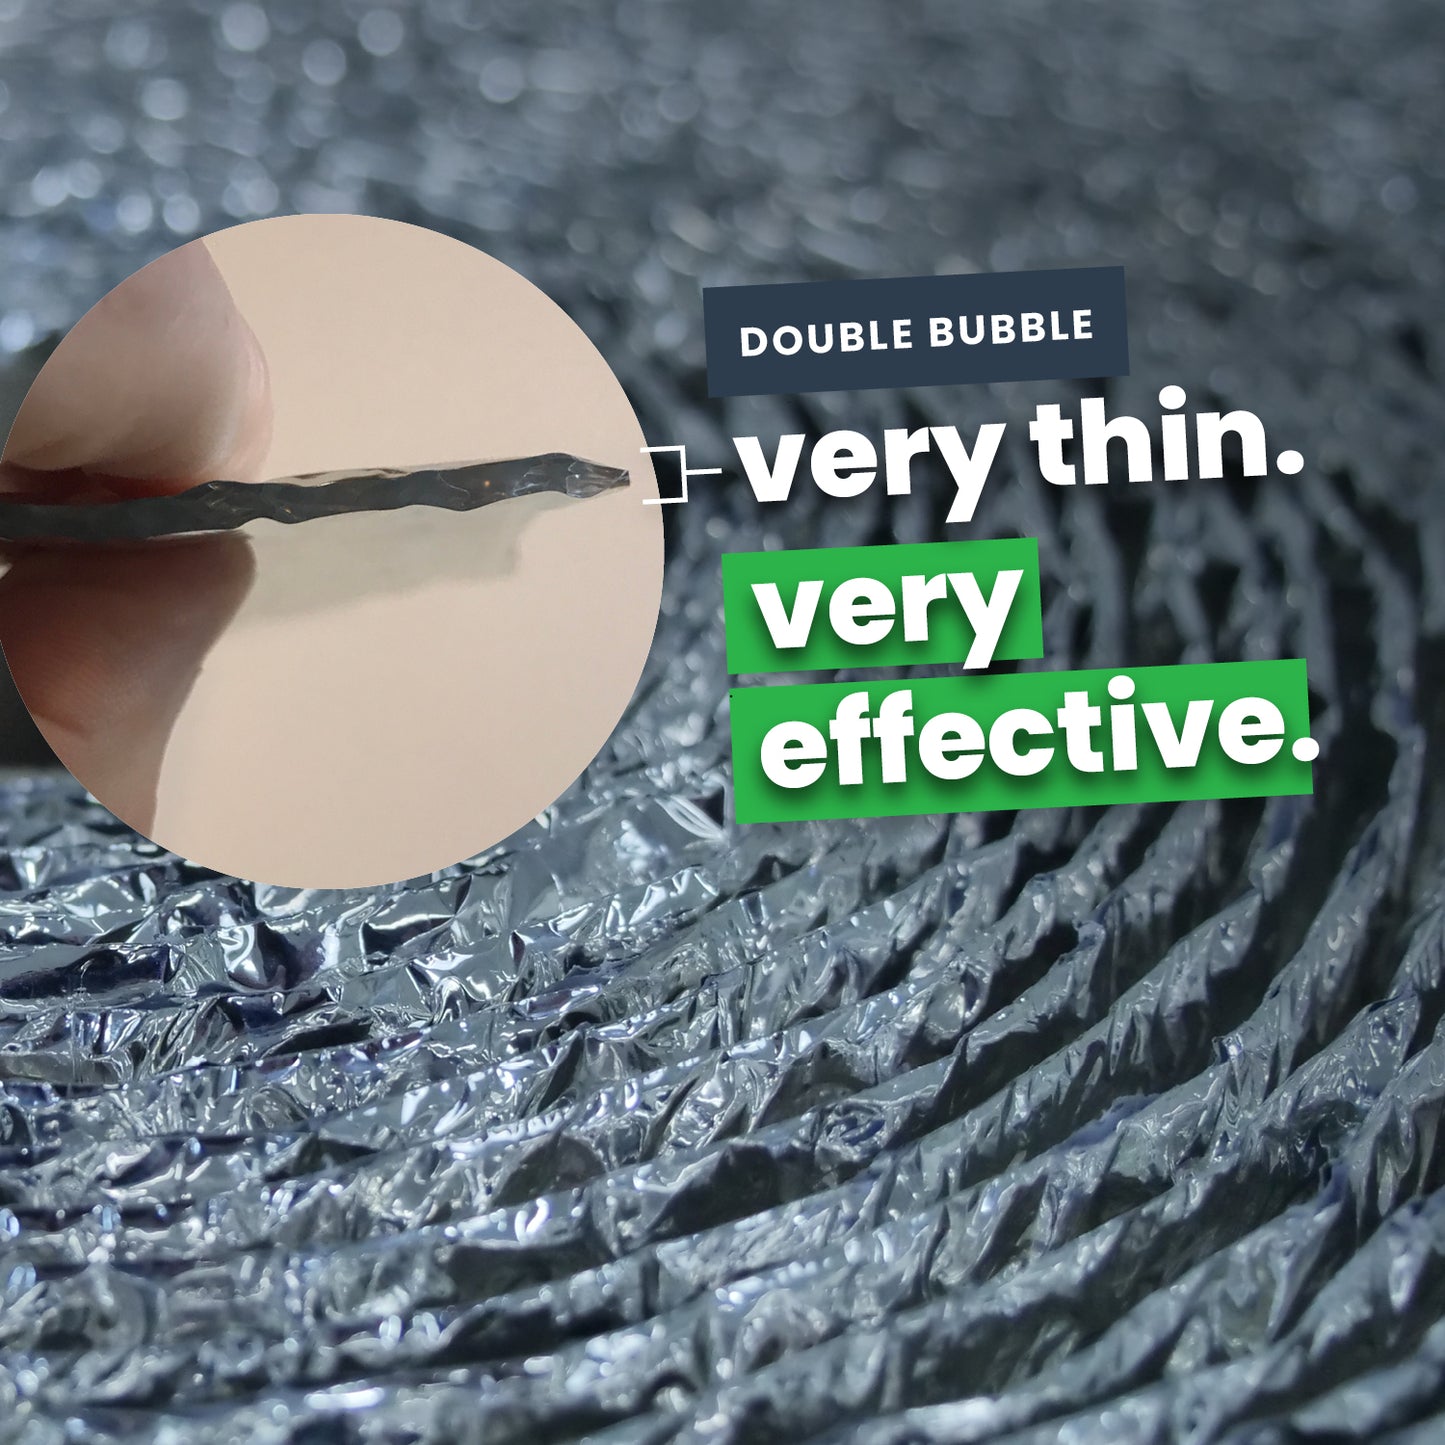 double bubble insulation is very thin and very effective